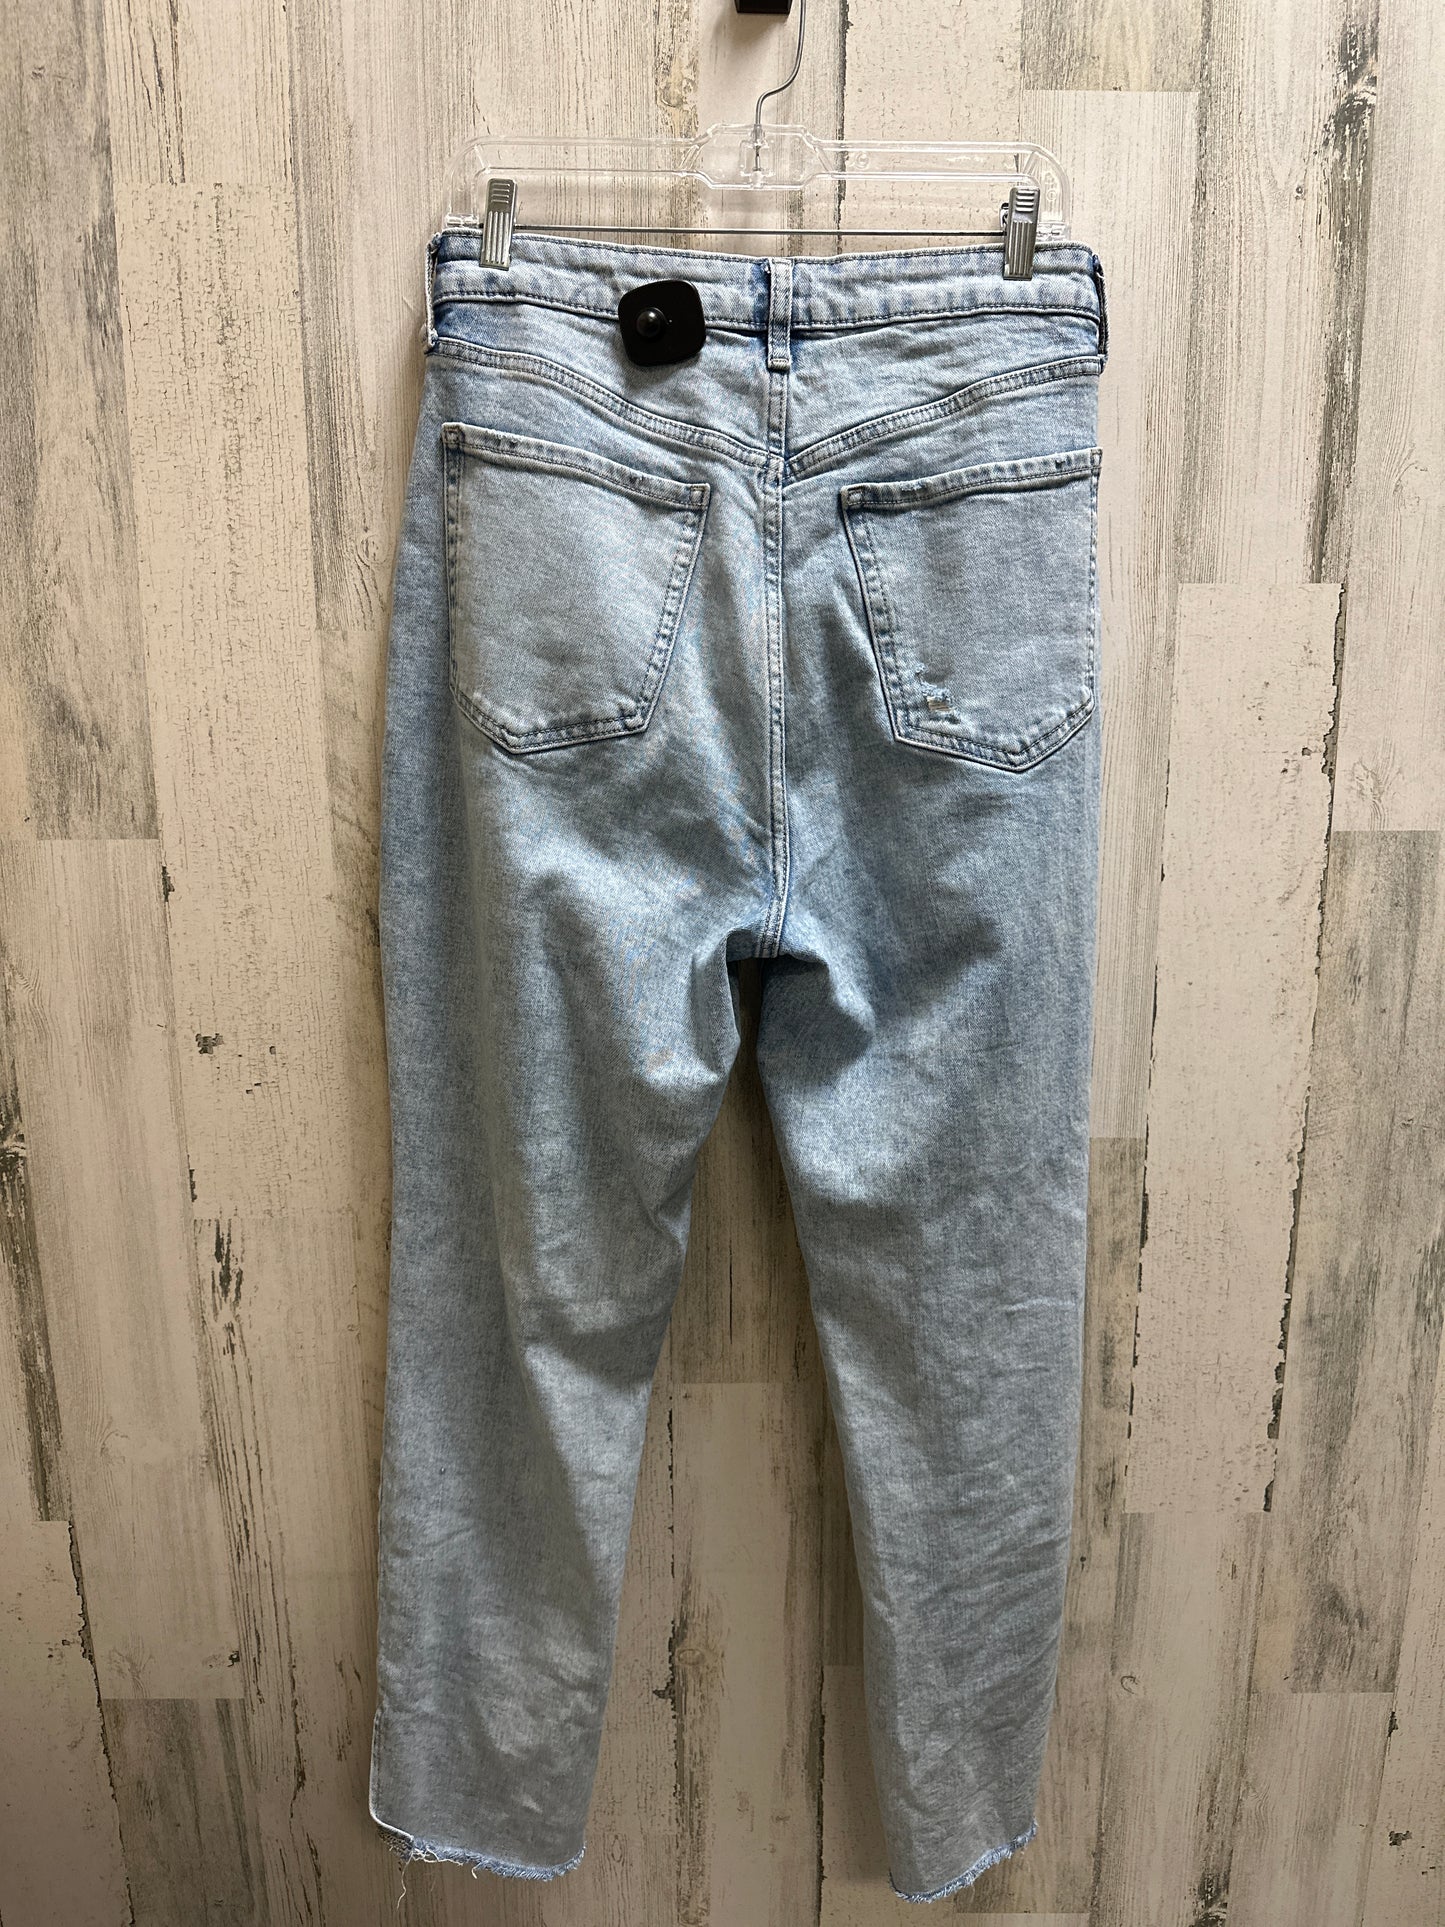 Jeans Skinny By Old Navy  Size: 10